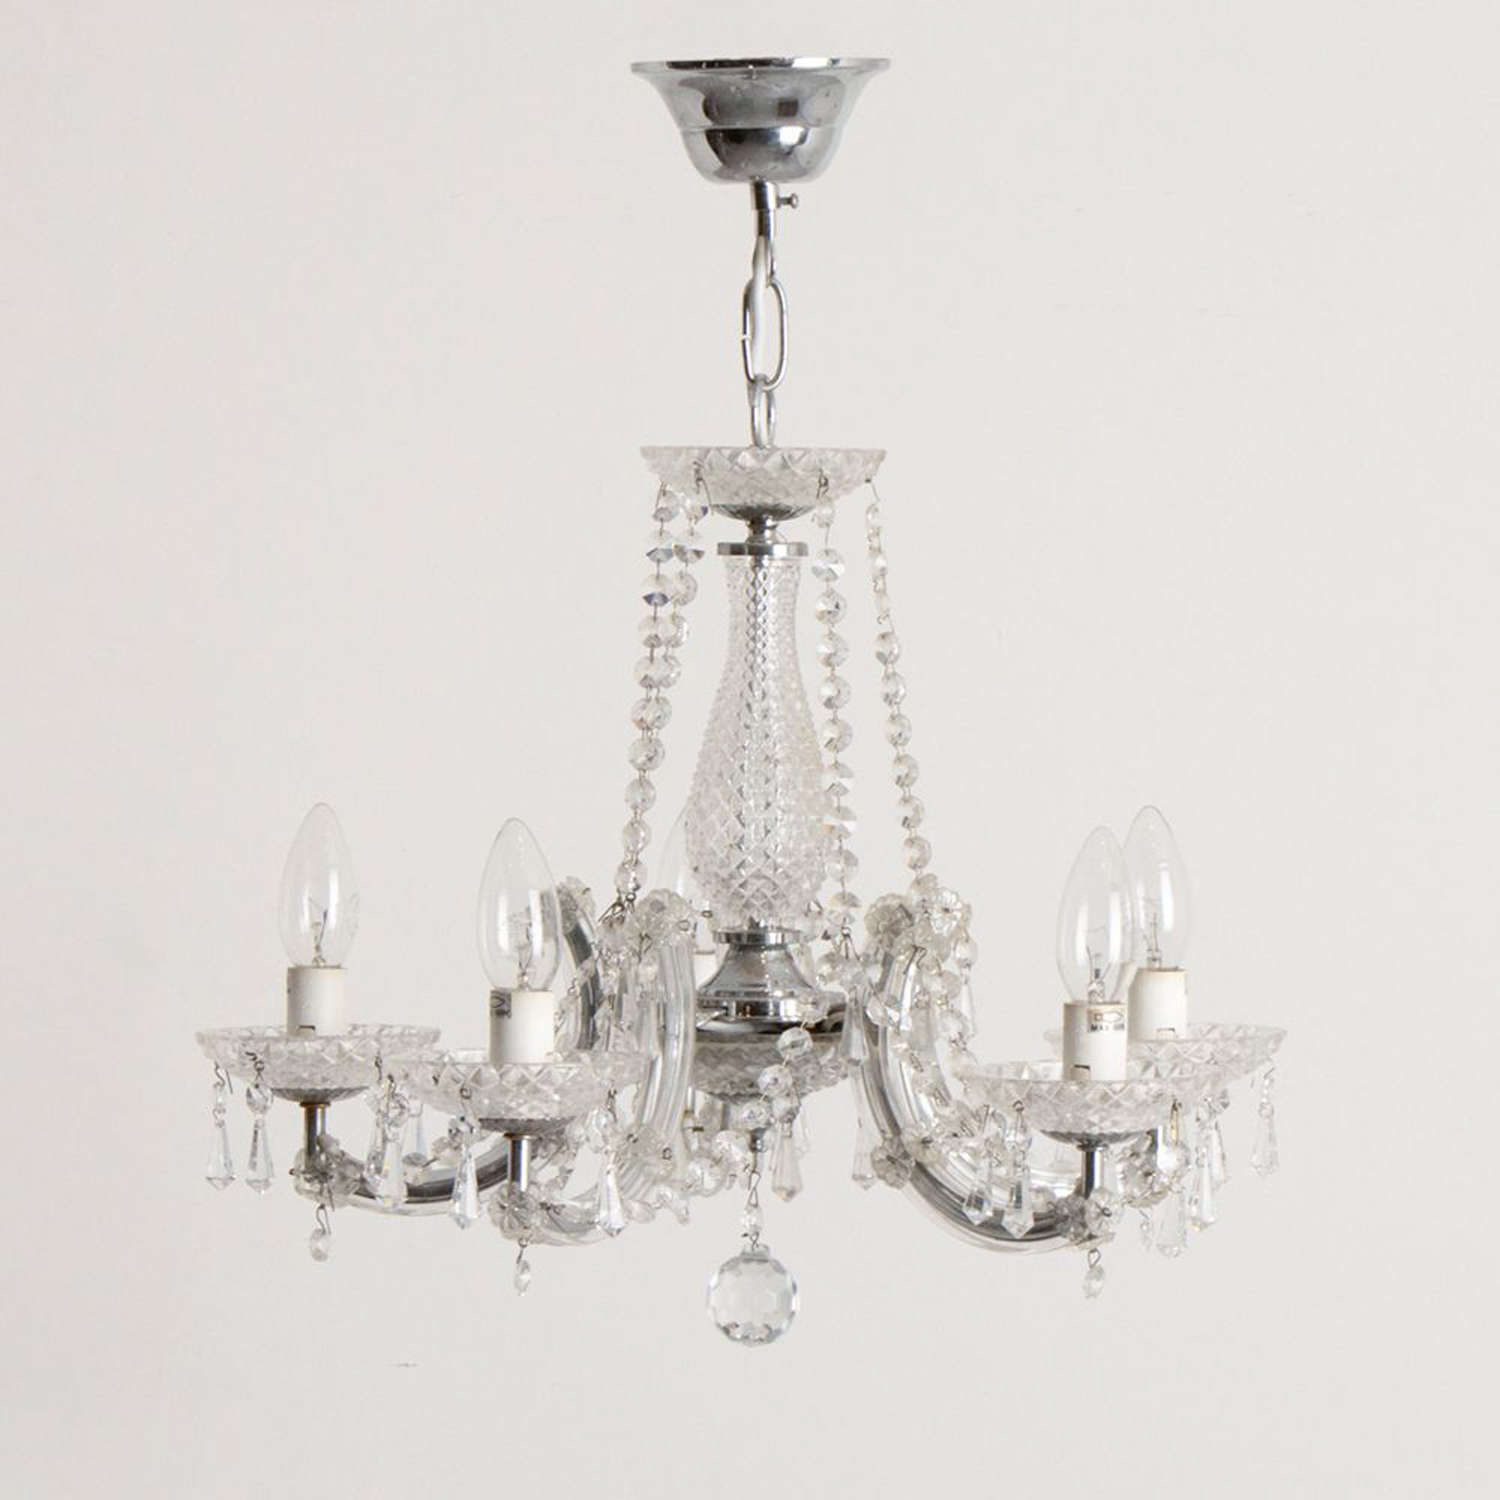 A small 1940's chandelier